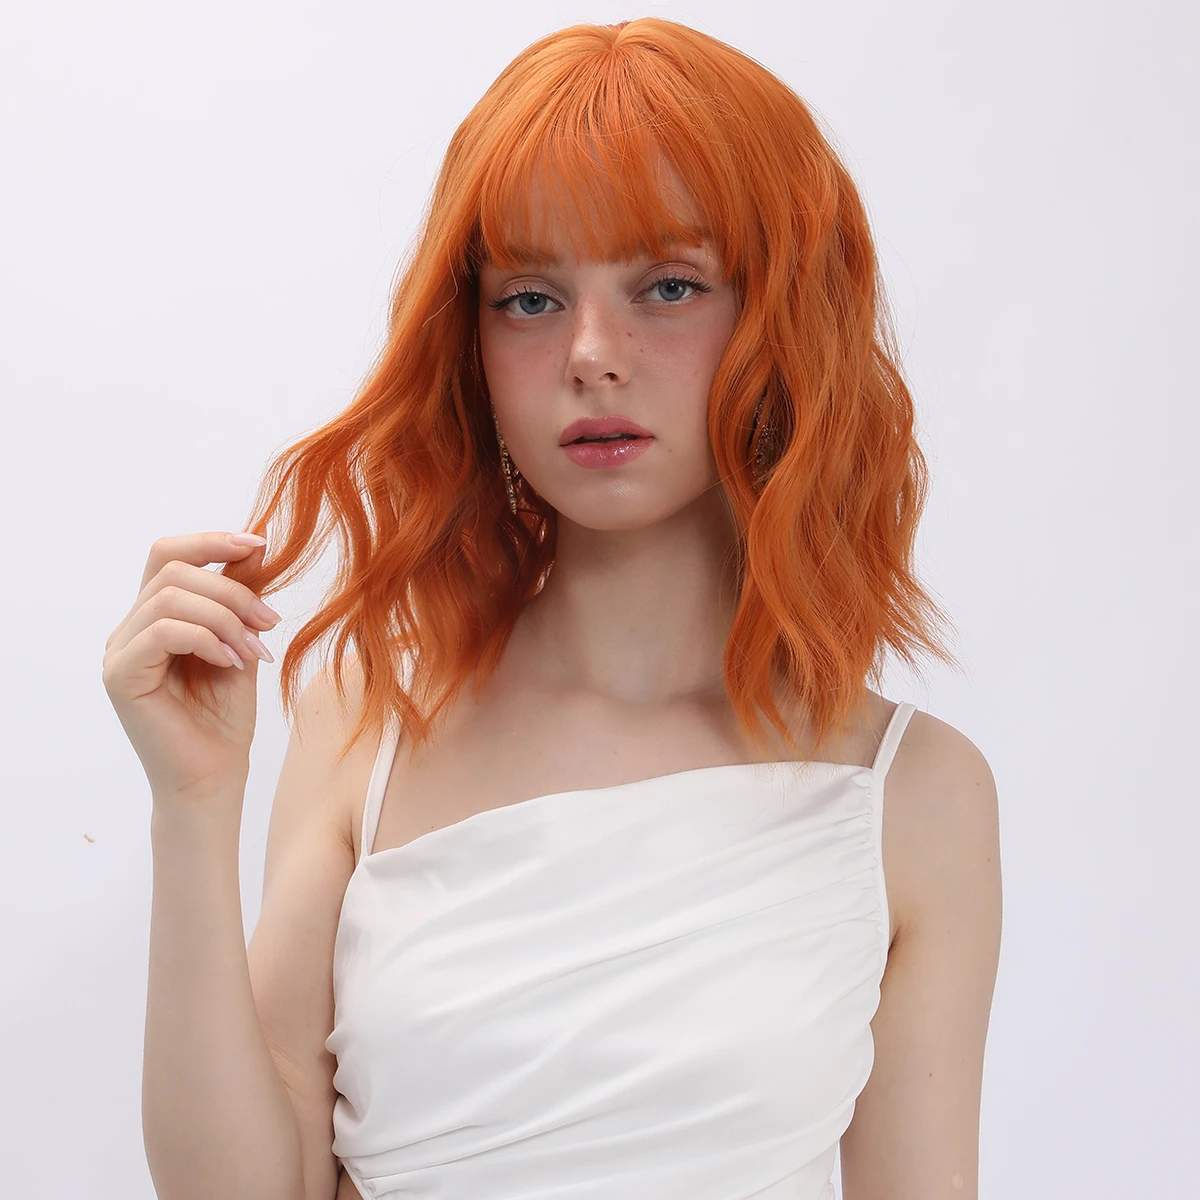 

Women's Role-Playing Lolita Wig Orange Short Hair Curly Bangs High-Temperature Silk Can Be Ironed And Dyed